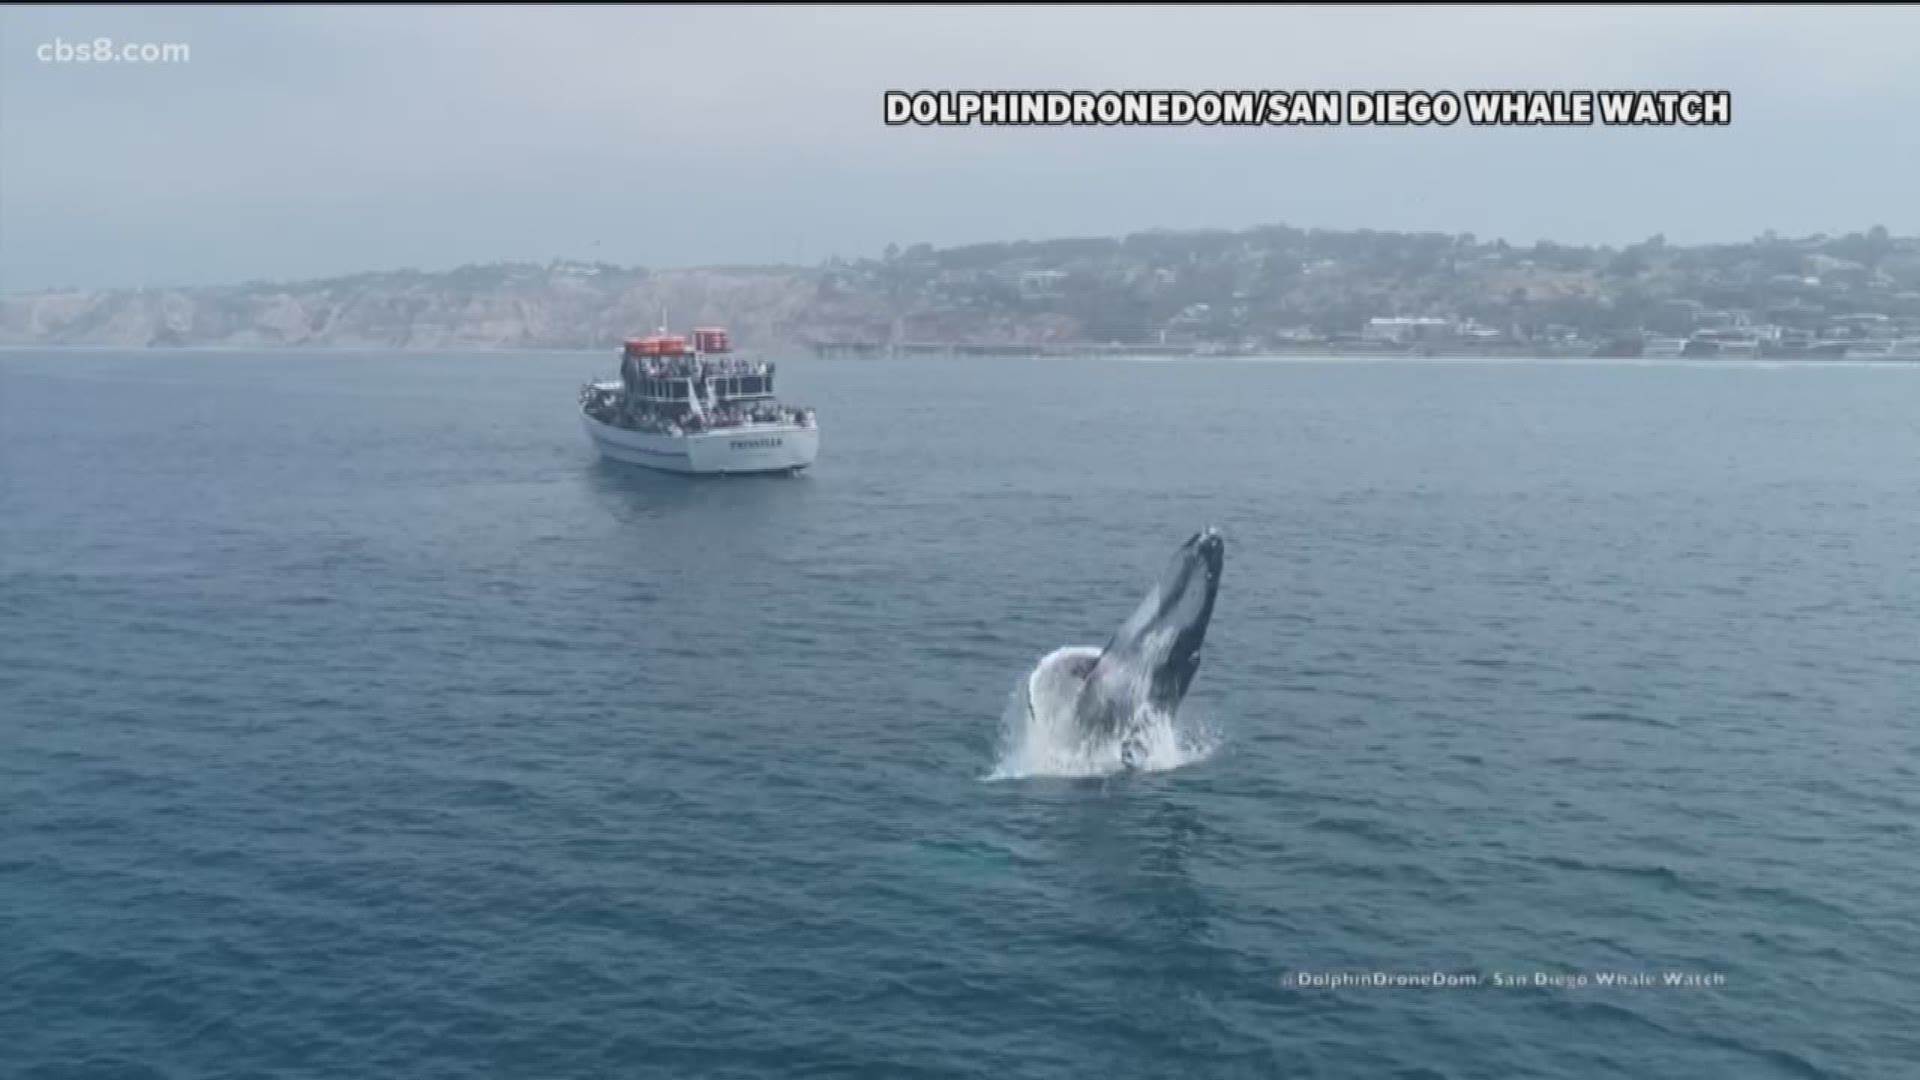 Check out this incredible video captured by Domenic Biagini, who works for San Diego Whale Watch, of a humpback whale breaching near the Scripps Pier in La Jolla.